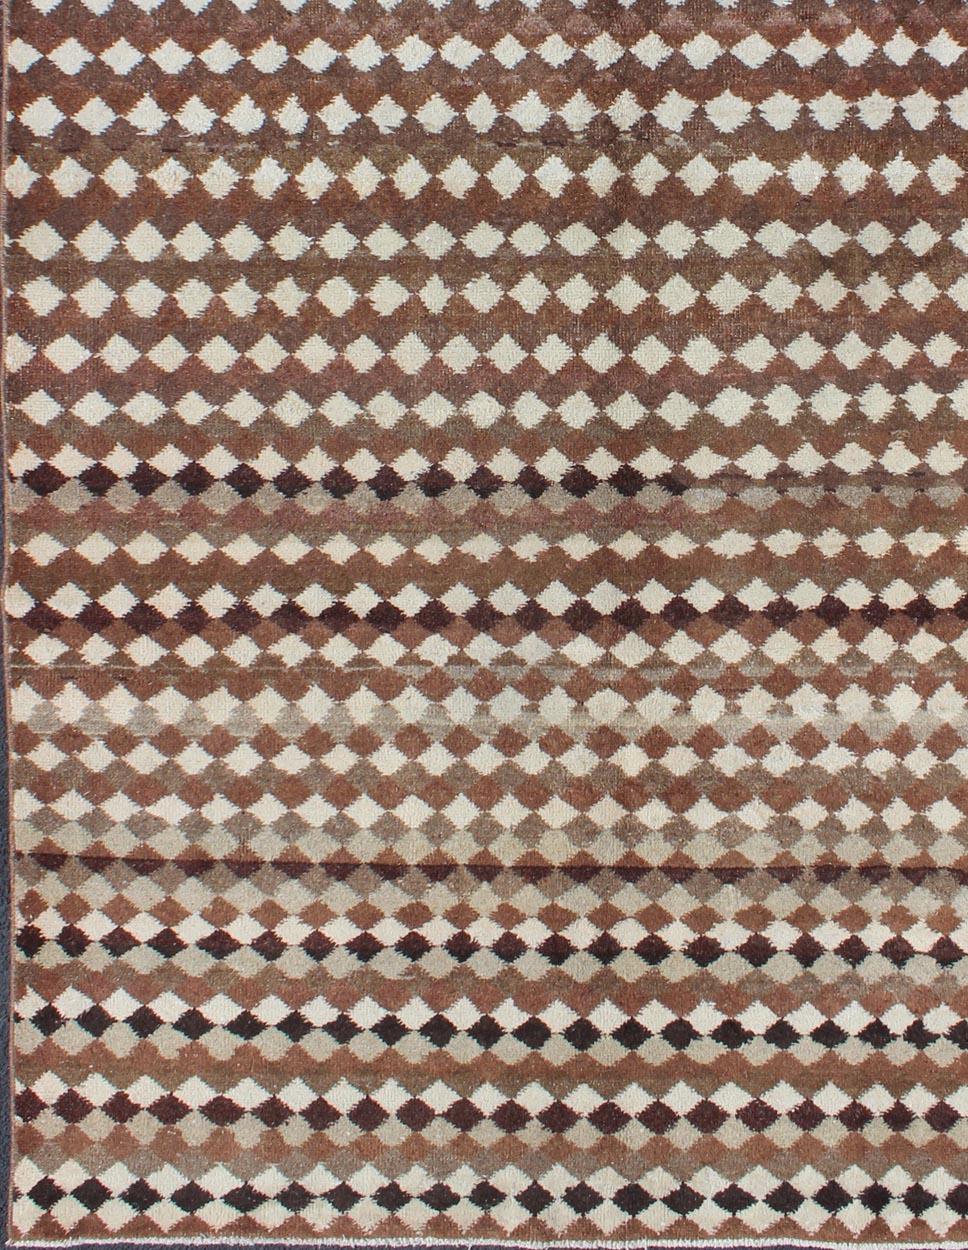 Measures: 5'5 x 9'4.
Set on a brown field with an all-over Modern/Mid-Century Modern pattern, this beautiful vintage rug (circa mid-20th century) features a repeating design of diamond shapes. Accent colors include ivory, cream, charcoal, and